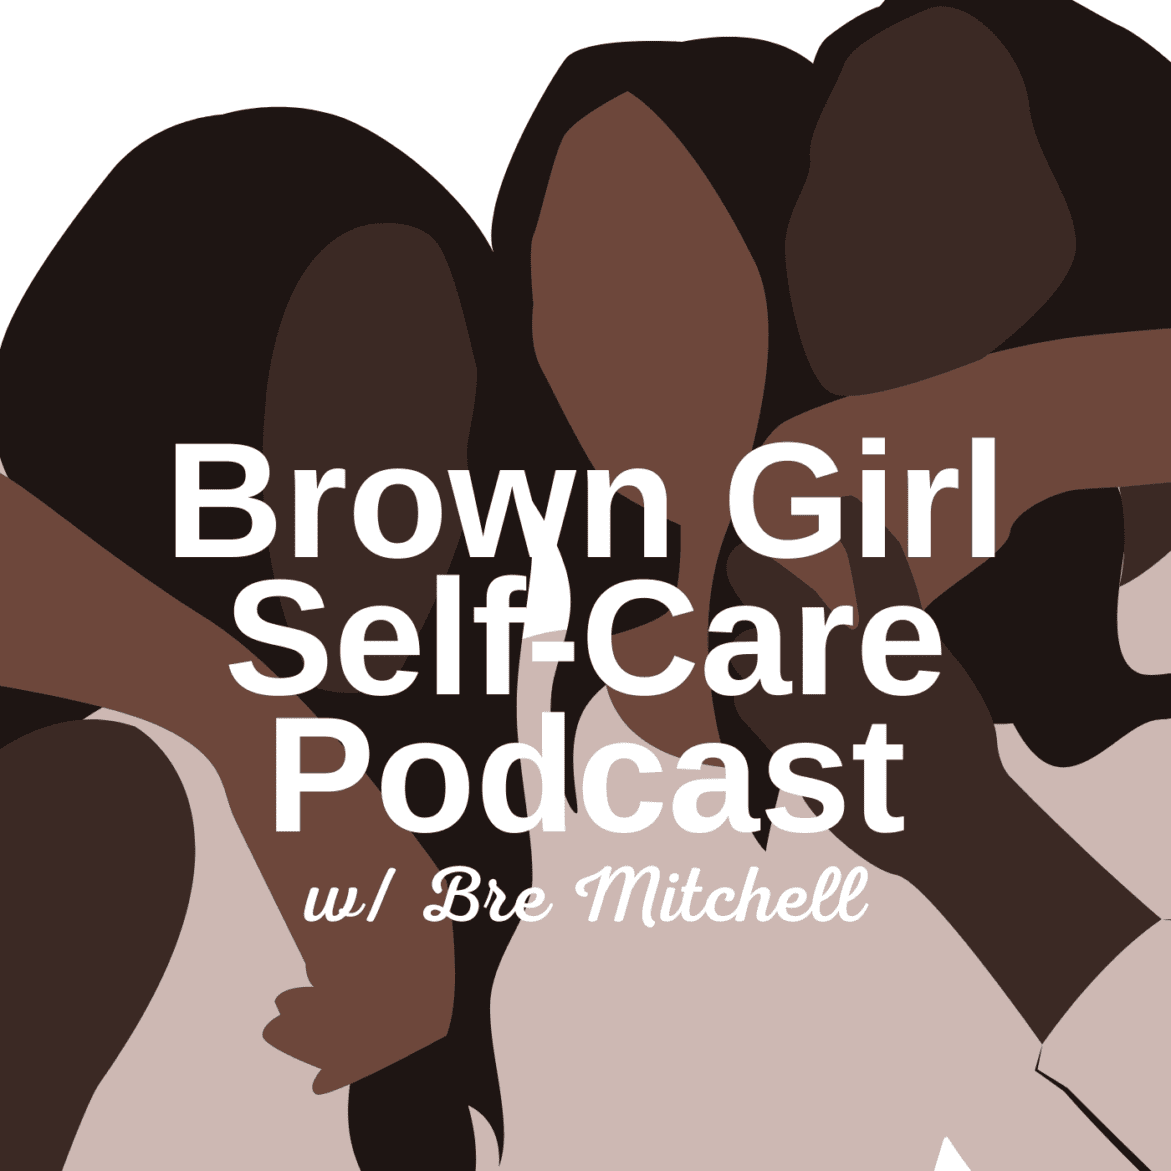 Black Podcasting - 4 Surprising Ways You May Have Not Be A Safe Space For Black Women